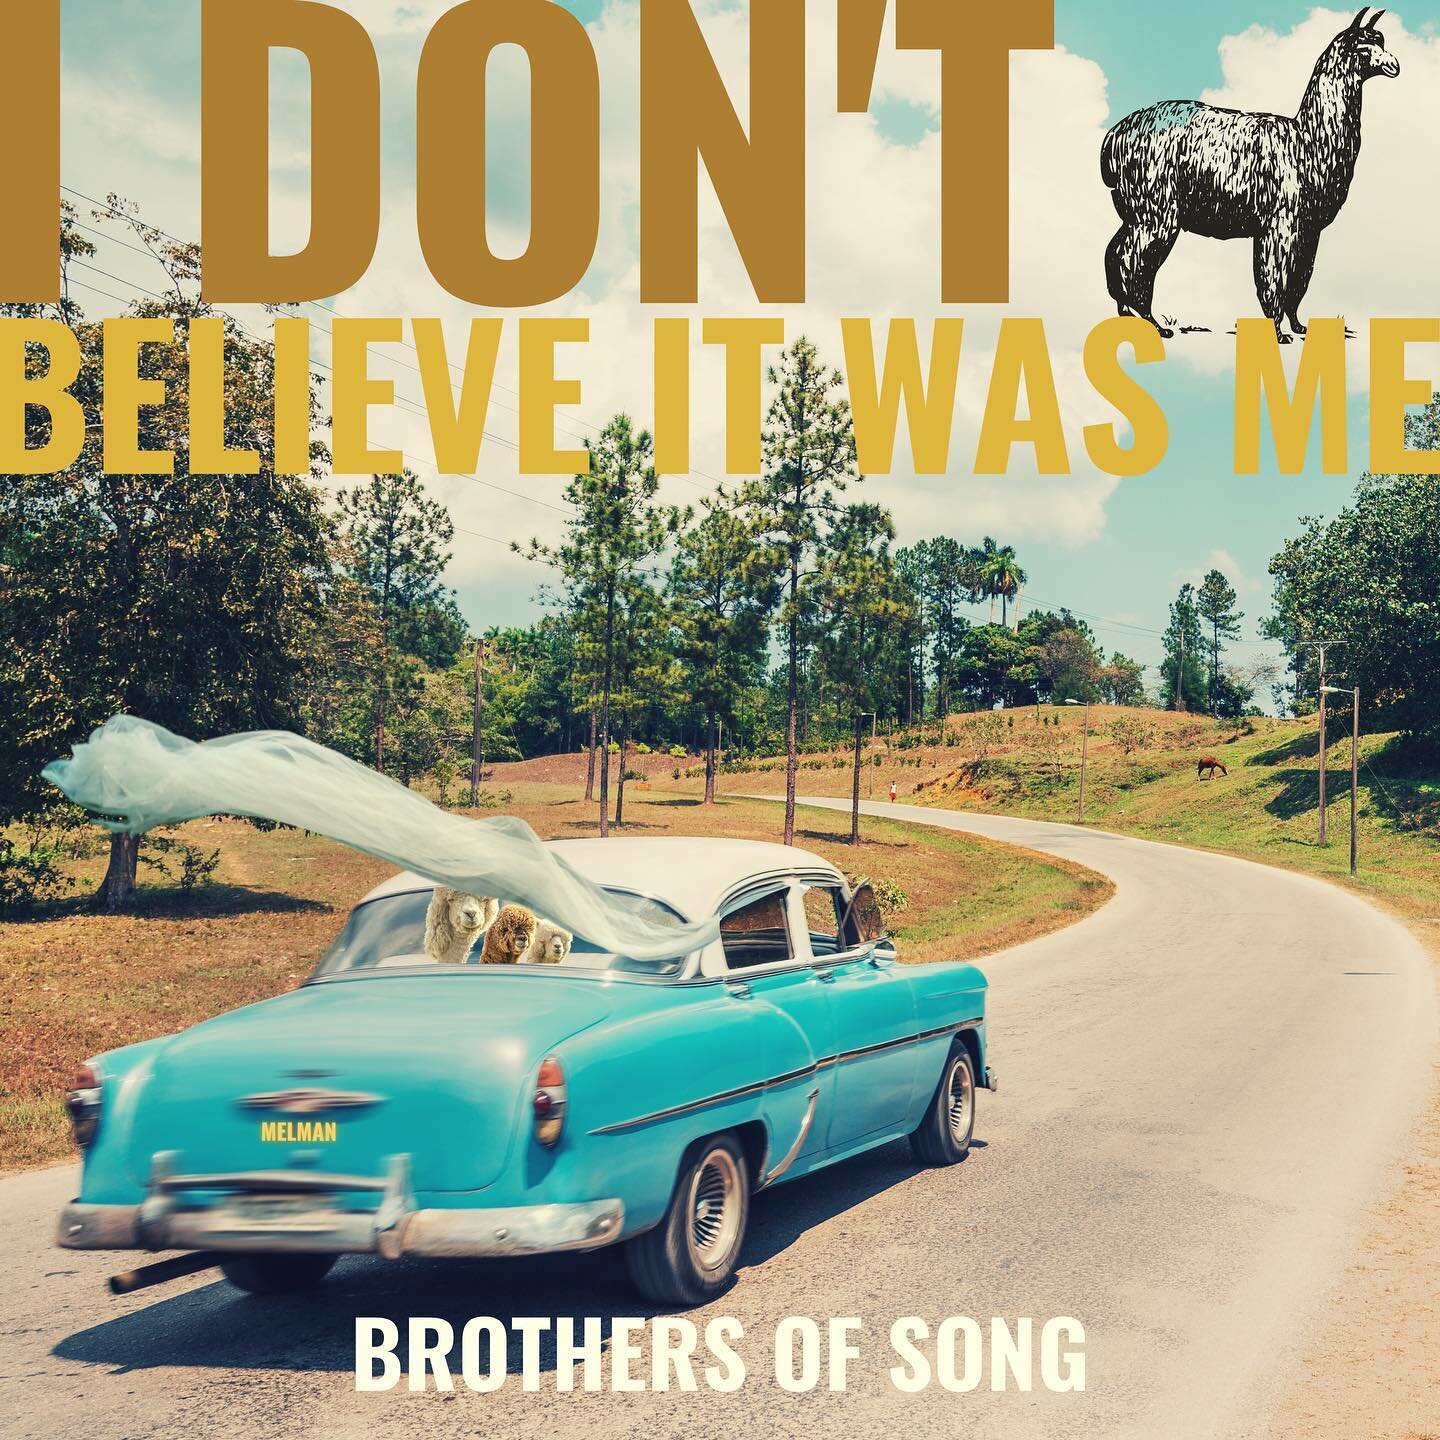 New Single coming soon, by brother Melman. What did he do?